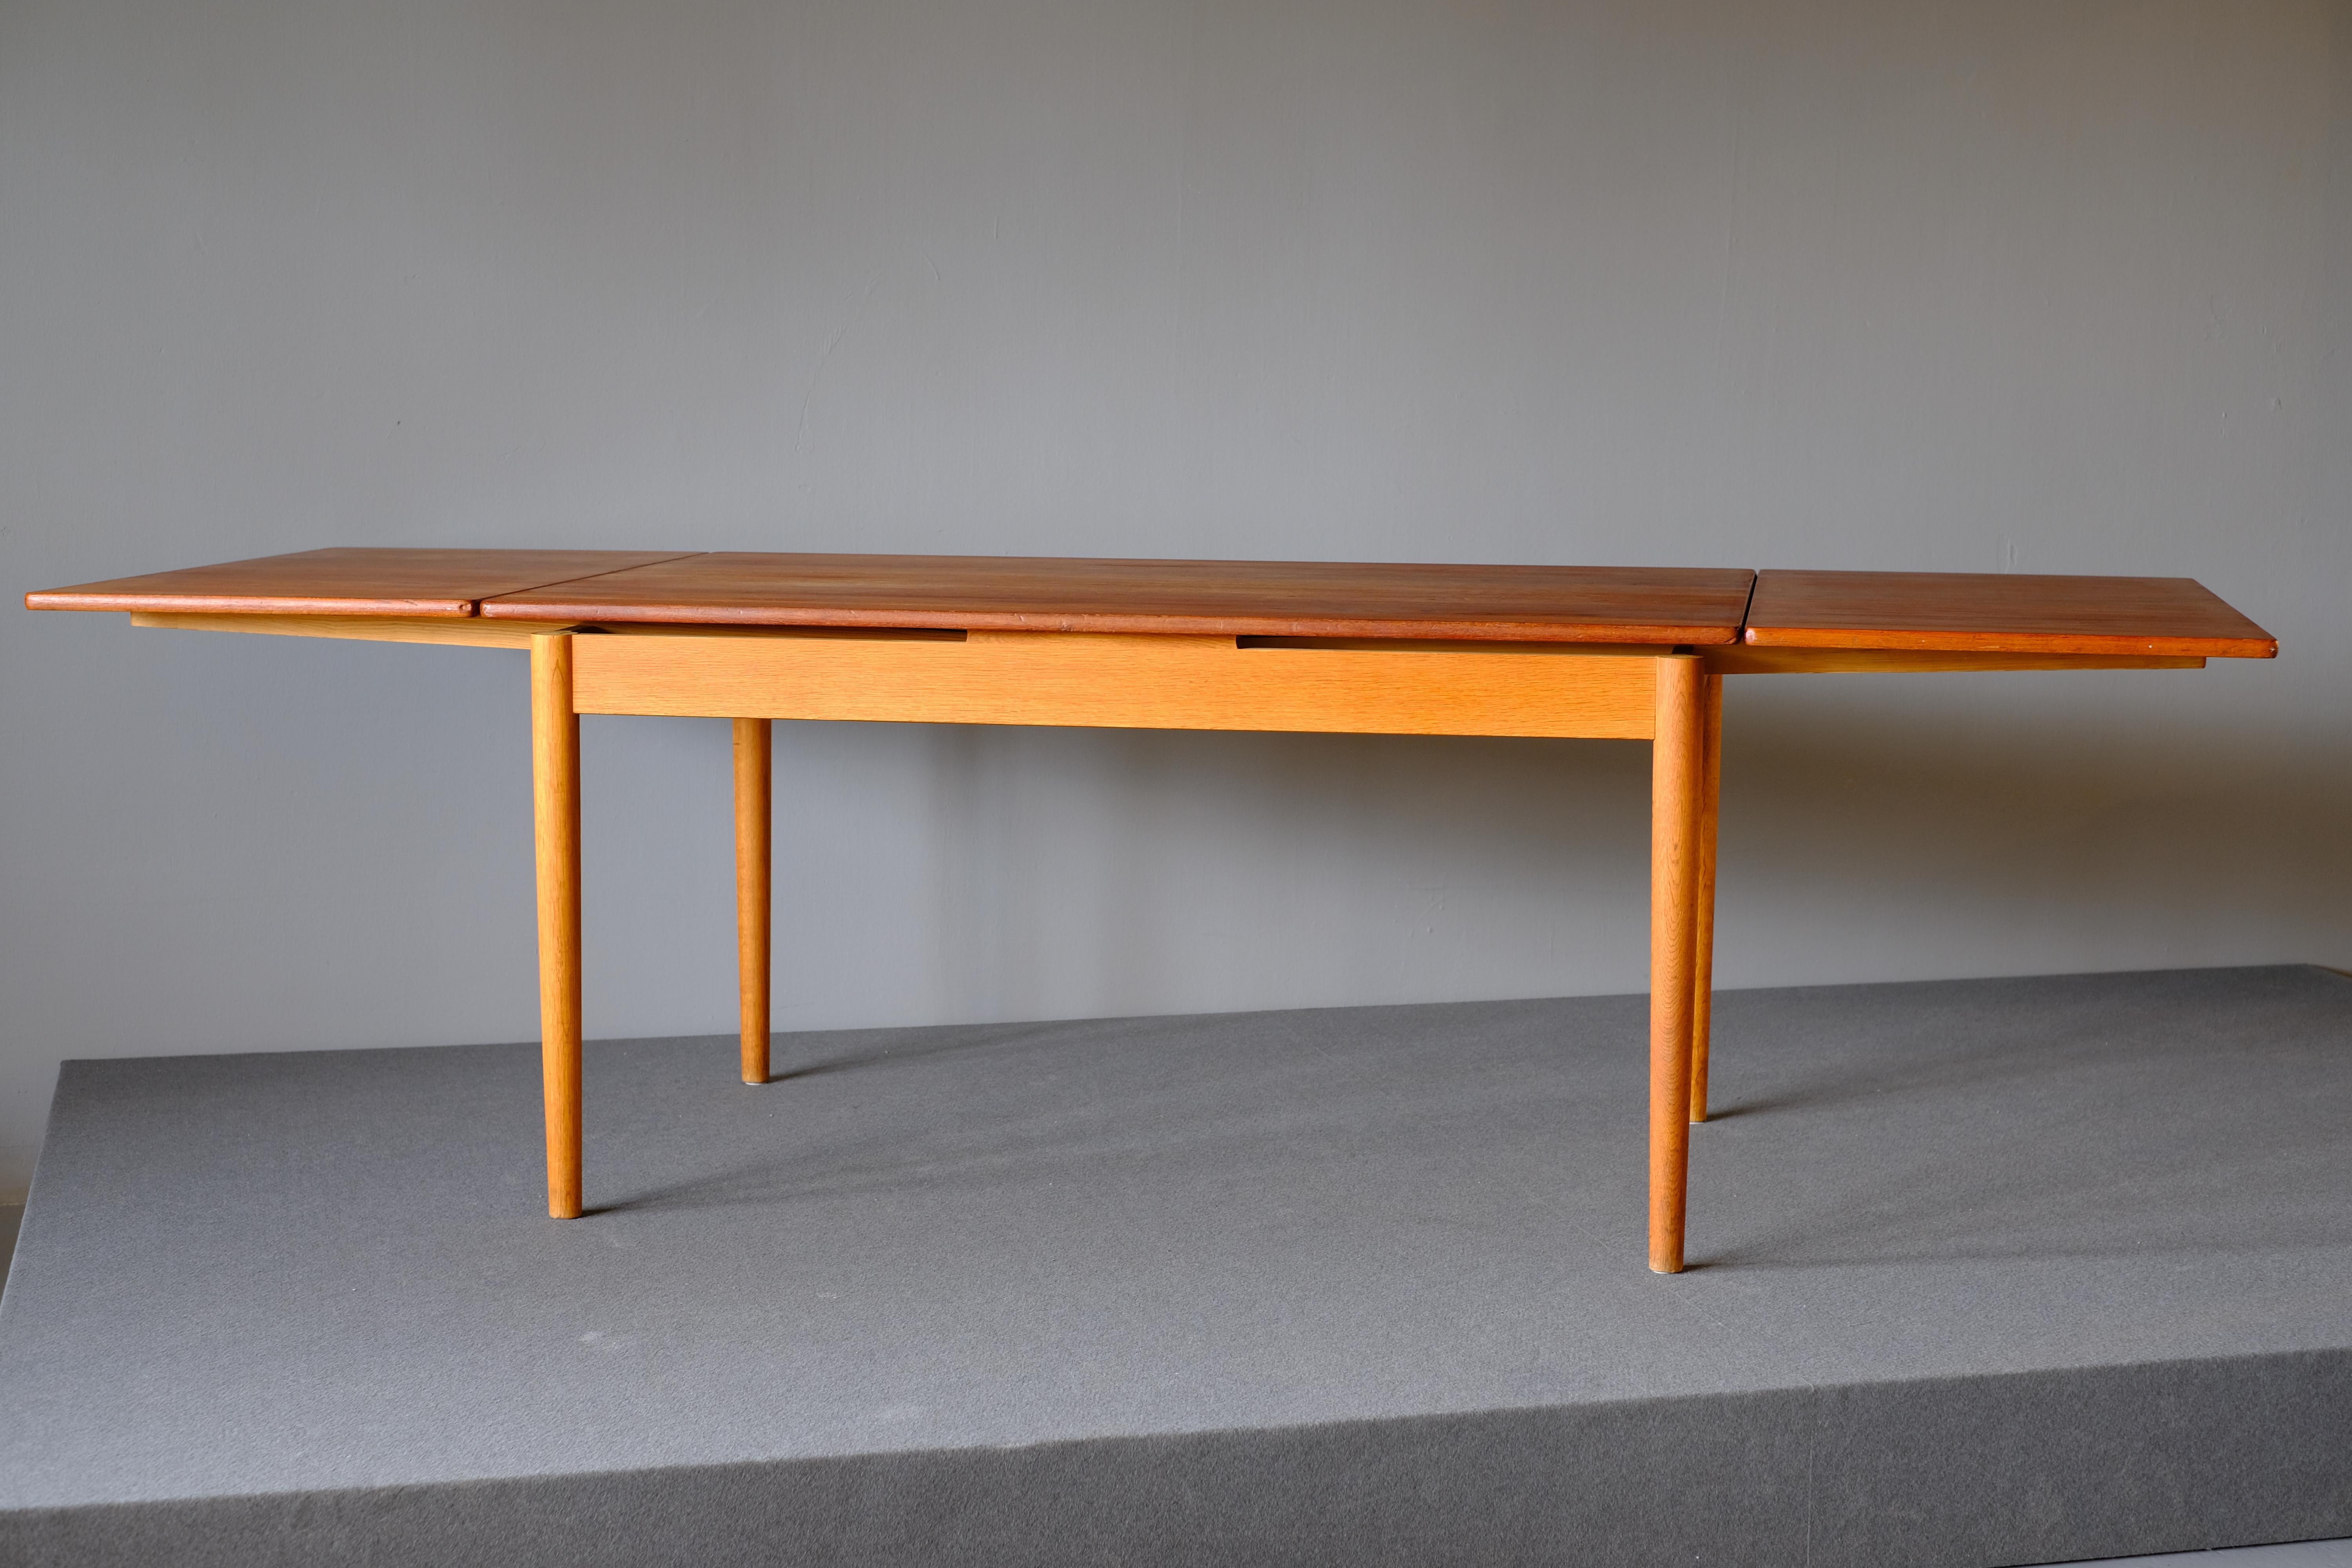 Dining table Model AT 316 designed by Hans Wegner for Andreas Tuck. It is in teak and has 2 pull-out / pull-out leaves which hide under the top. The leaves are cleverly integrated into the top when they are not in use. The table has round slightly